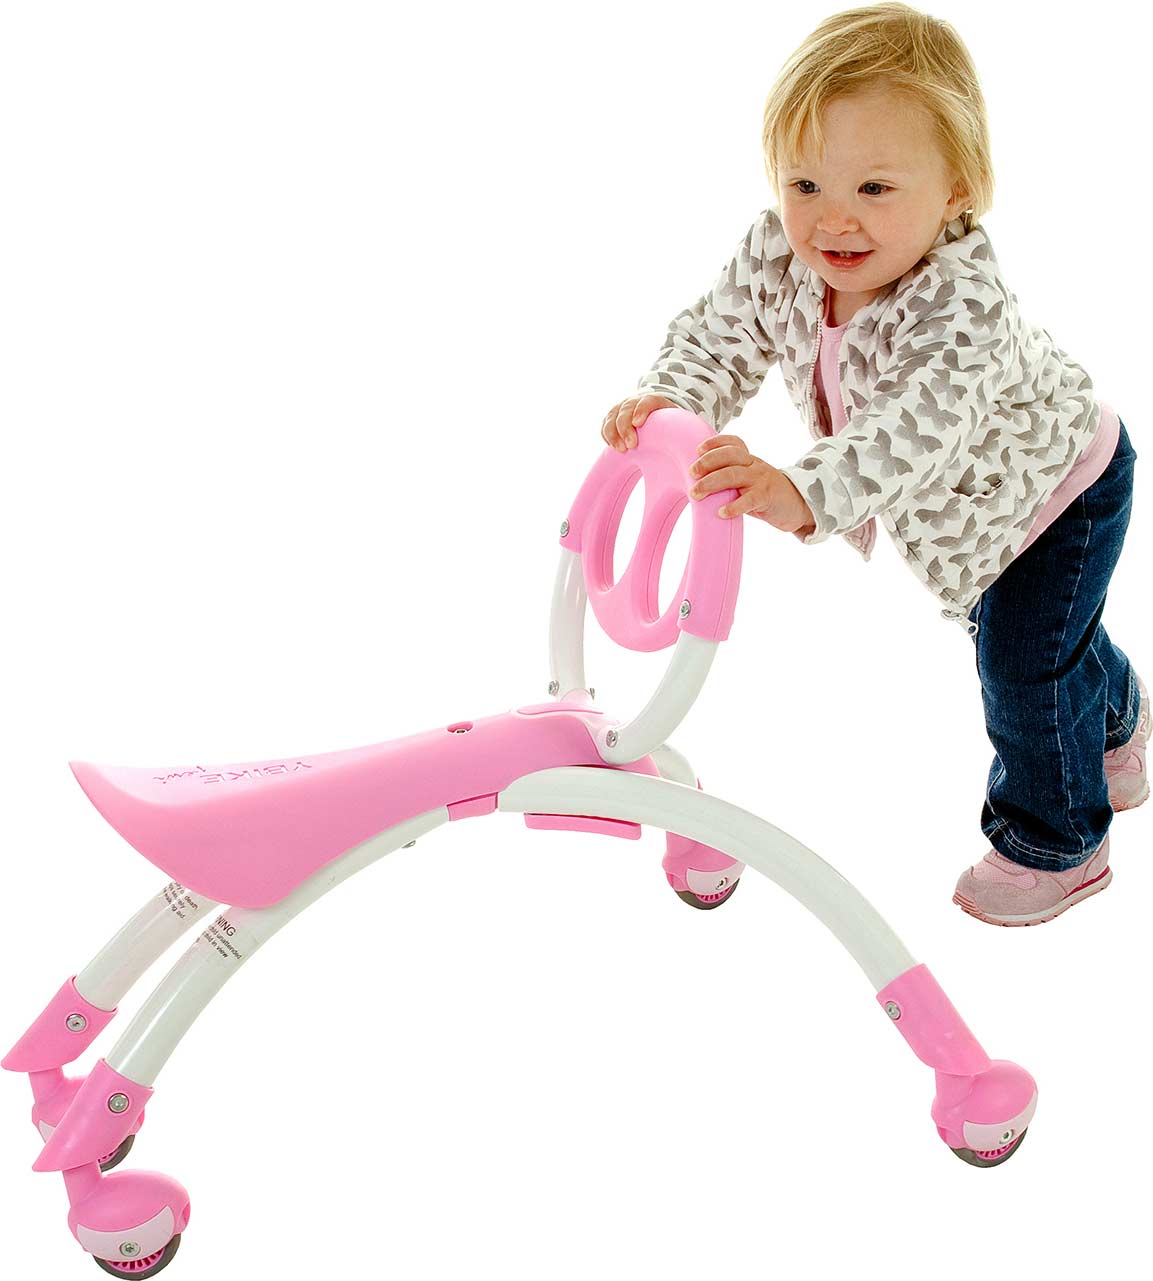 YBike Pewi Pink - A Child's Delight